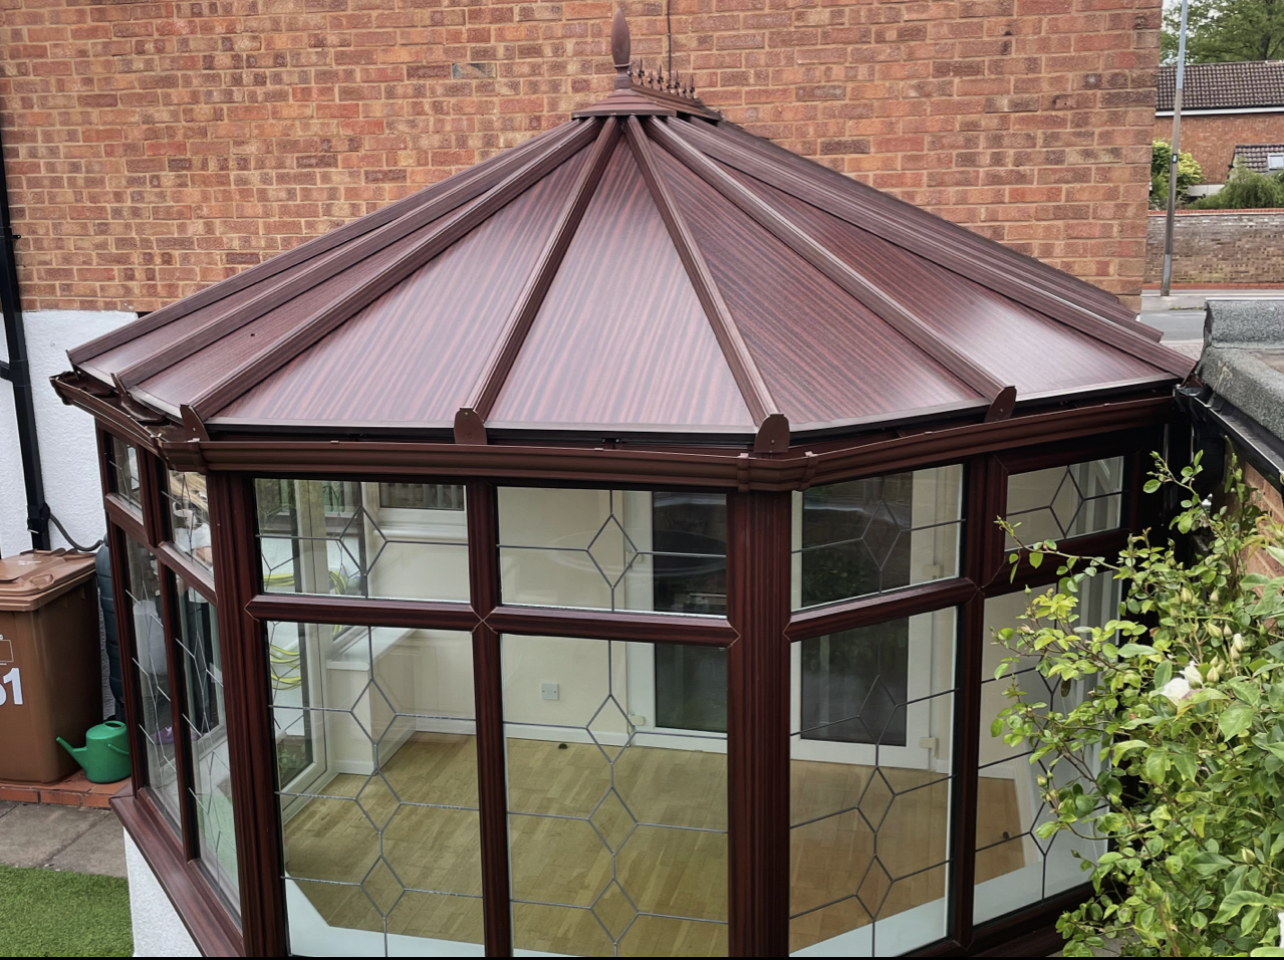 Insulated Conservatory Ceiling